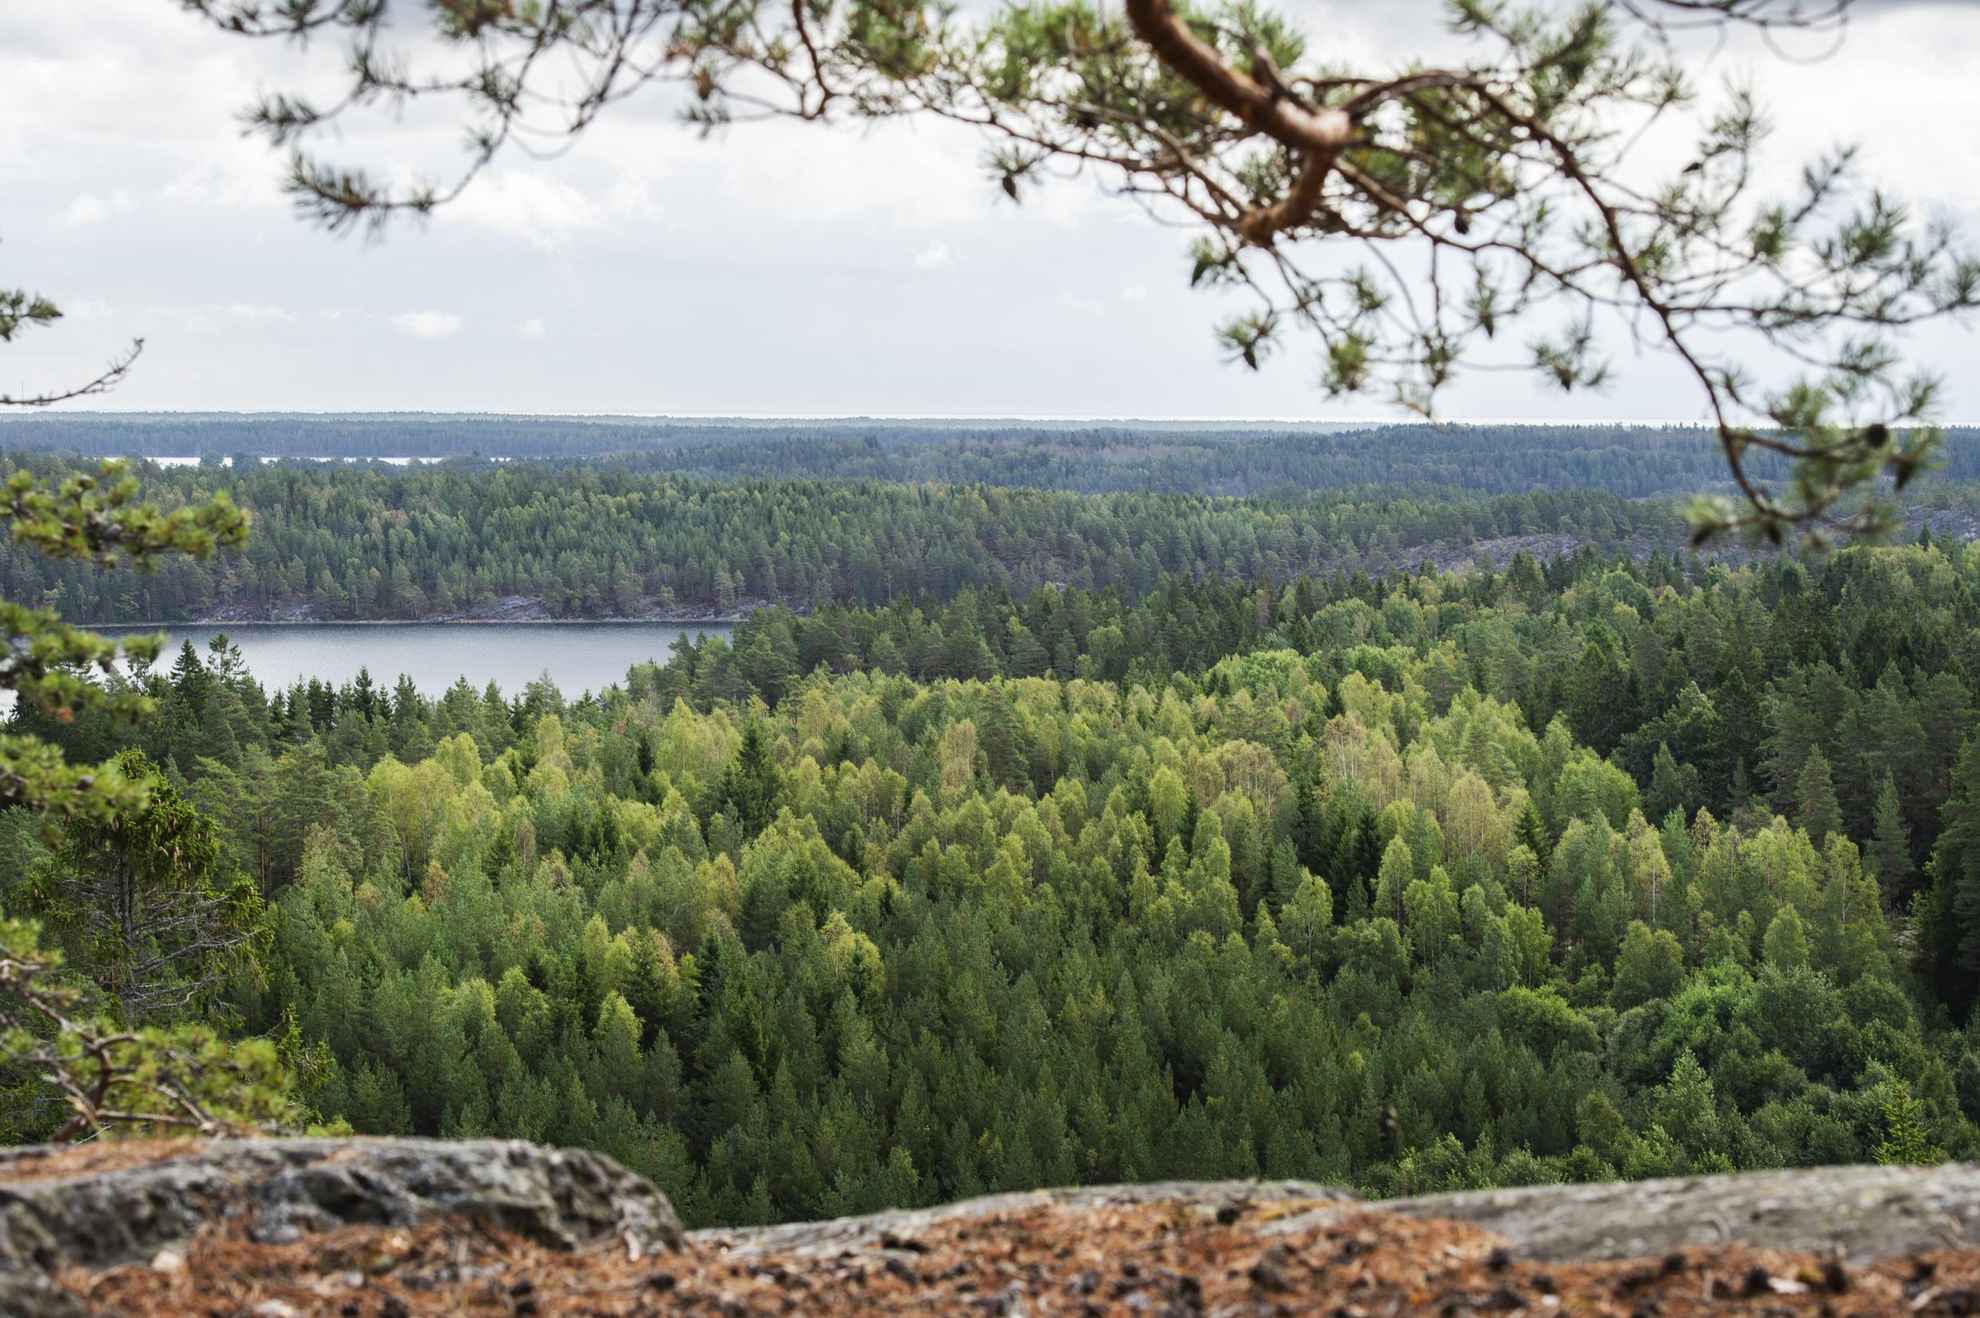 Forests of Dalsland